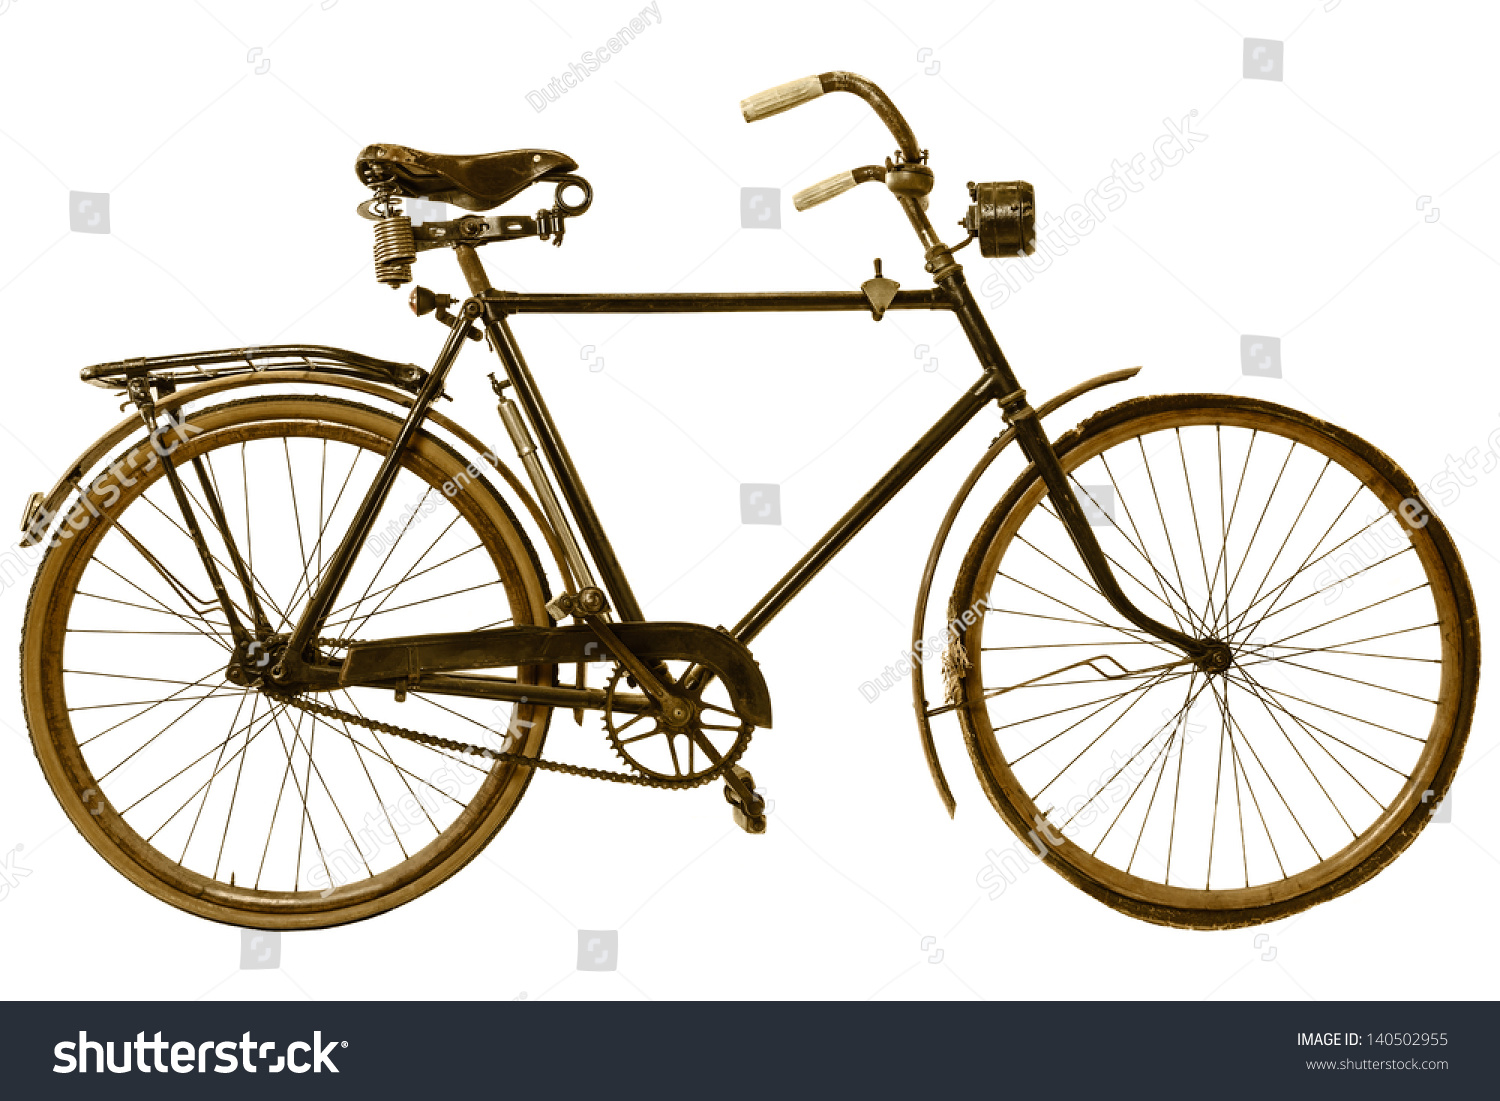 Retro styled image of a nineteenth century bicycle isolated on a white background #140502955